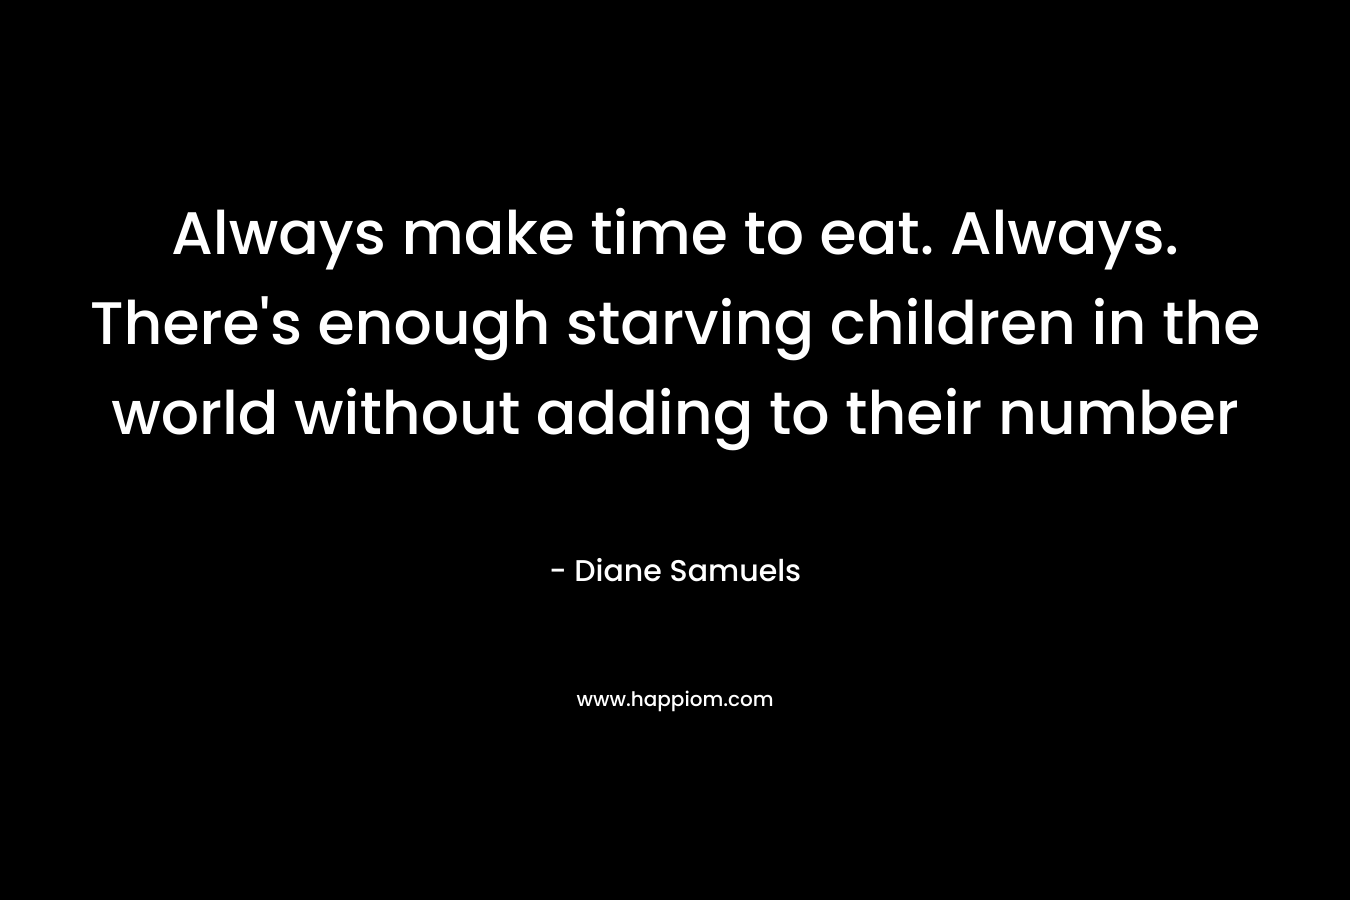 Always make time to eat. Always. There's enough starving children in the world without adding to their number